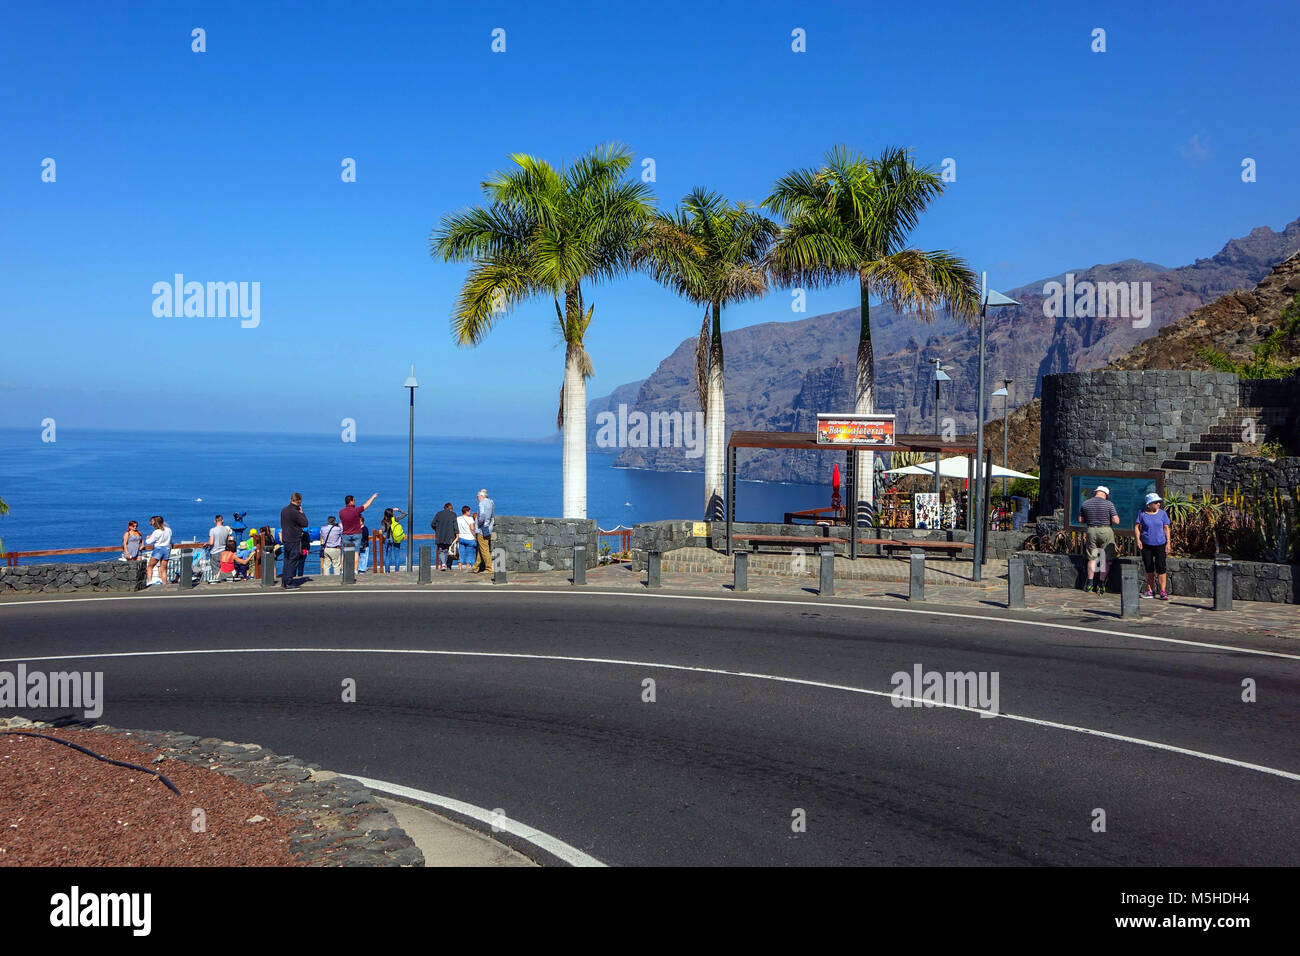 Los Gigantes resort seen from approach road, Tenerife, Spain Stock Photo